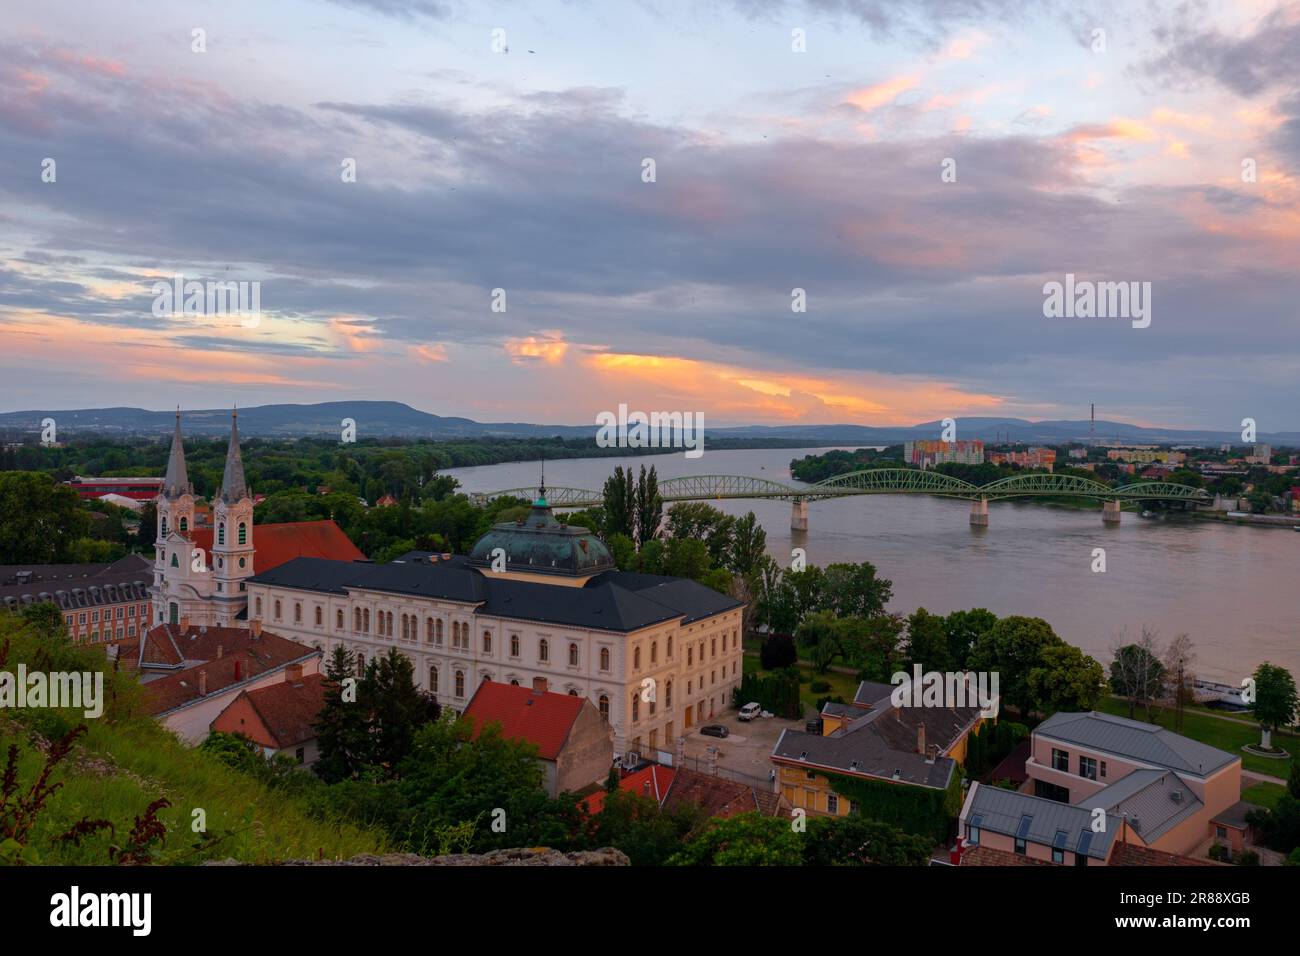 Aerial view about the Archdiocese Office of Esztergom, with Maria Valeria Bridge and Danube at the background. Cloudy sunset. Stock Photo